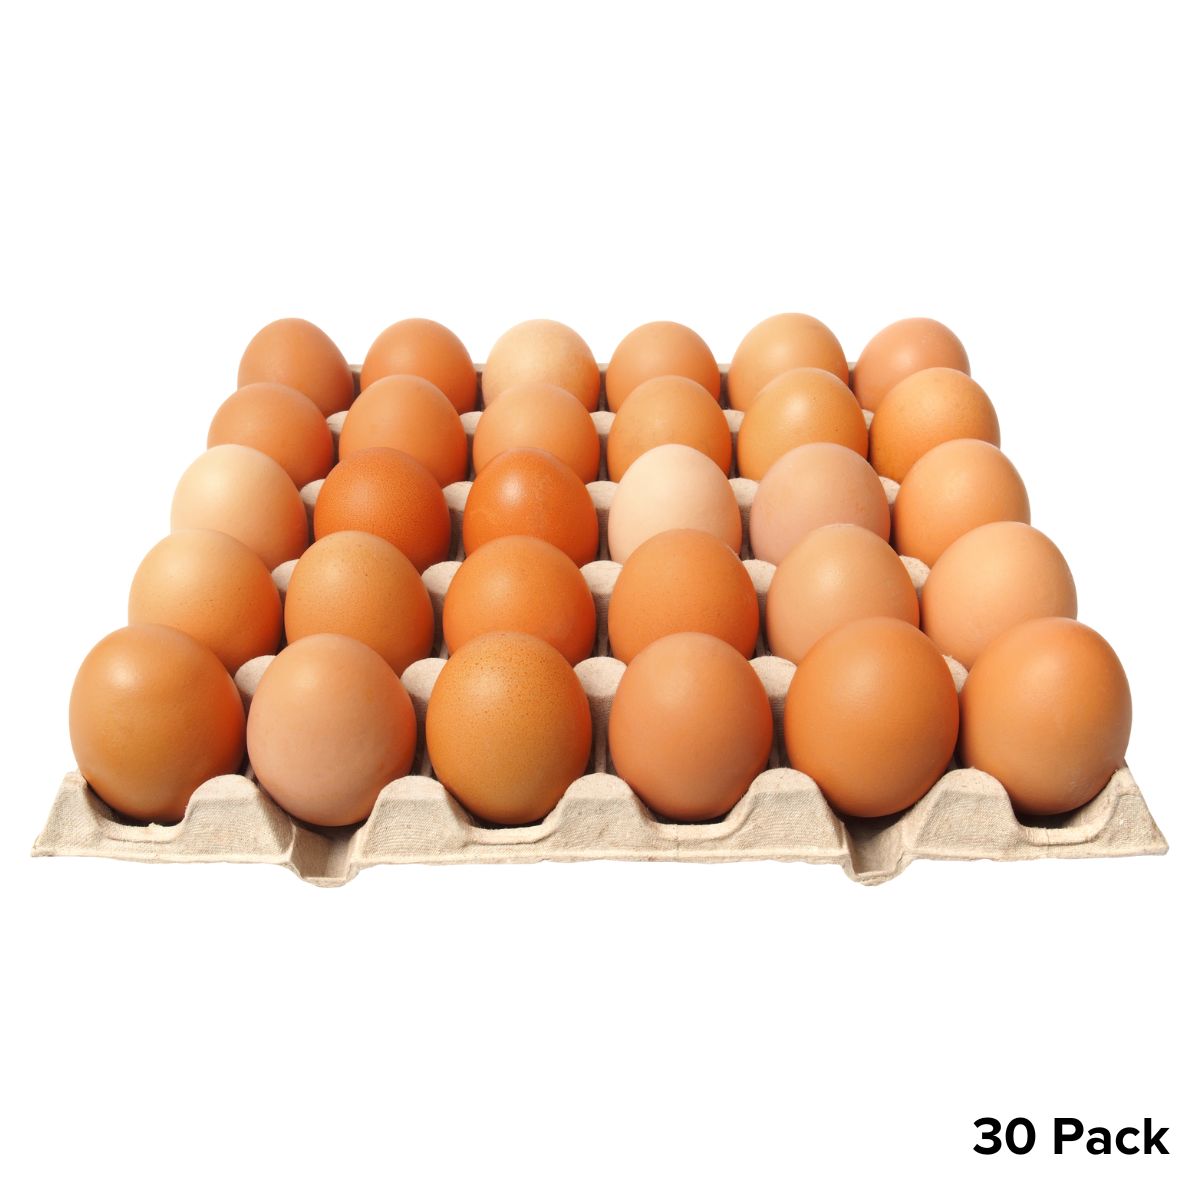 UK Eggs - Medium Fresh Eggs - 30 Pack in a carton on a white background.